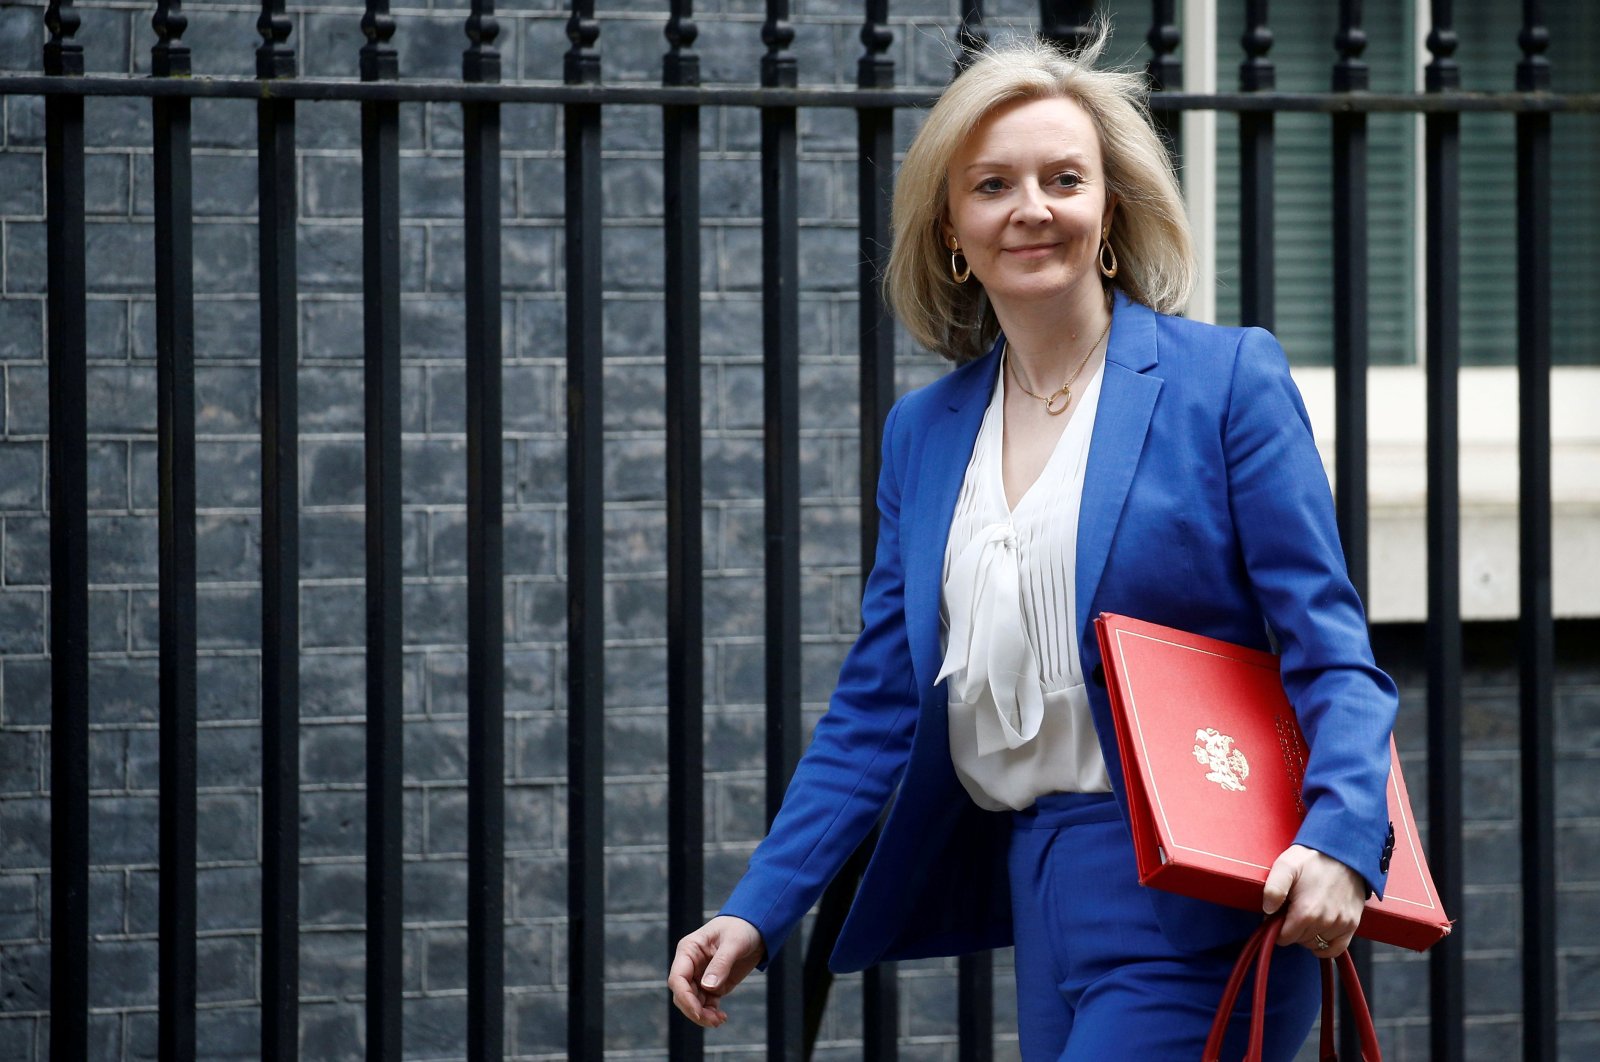 Britain's Secretary of State of International Trade and Minister for Women and Equalities Liz Truss is seen outside Downing Street, as the spread of the coronavirus disease (COVID-19) continues, in London, Britain, March 17, 2020. (Reuters Photo)'s Secretary of State of International Trade and Minister for Women and Equalities Liz Truss is seen outside Downing Street, as the spread of the coronavirus disease (COVID-19) continues, in London, Britain, March 17, 2020. (Reuters Photo)